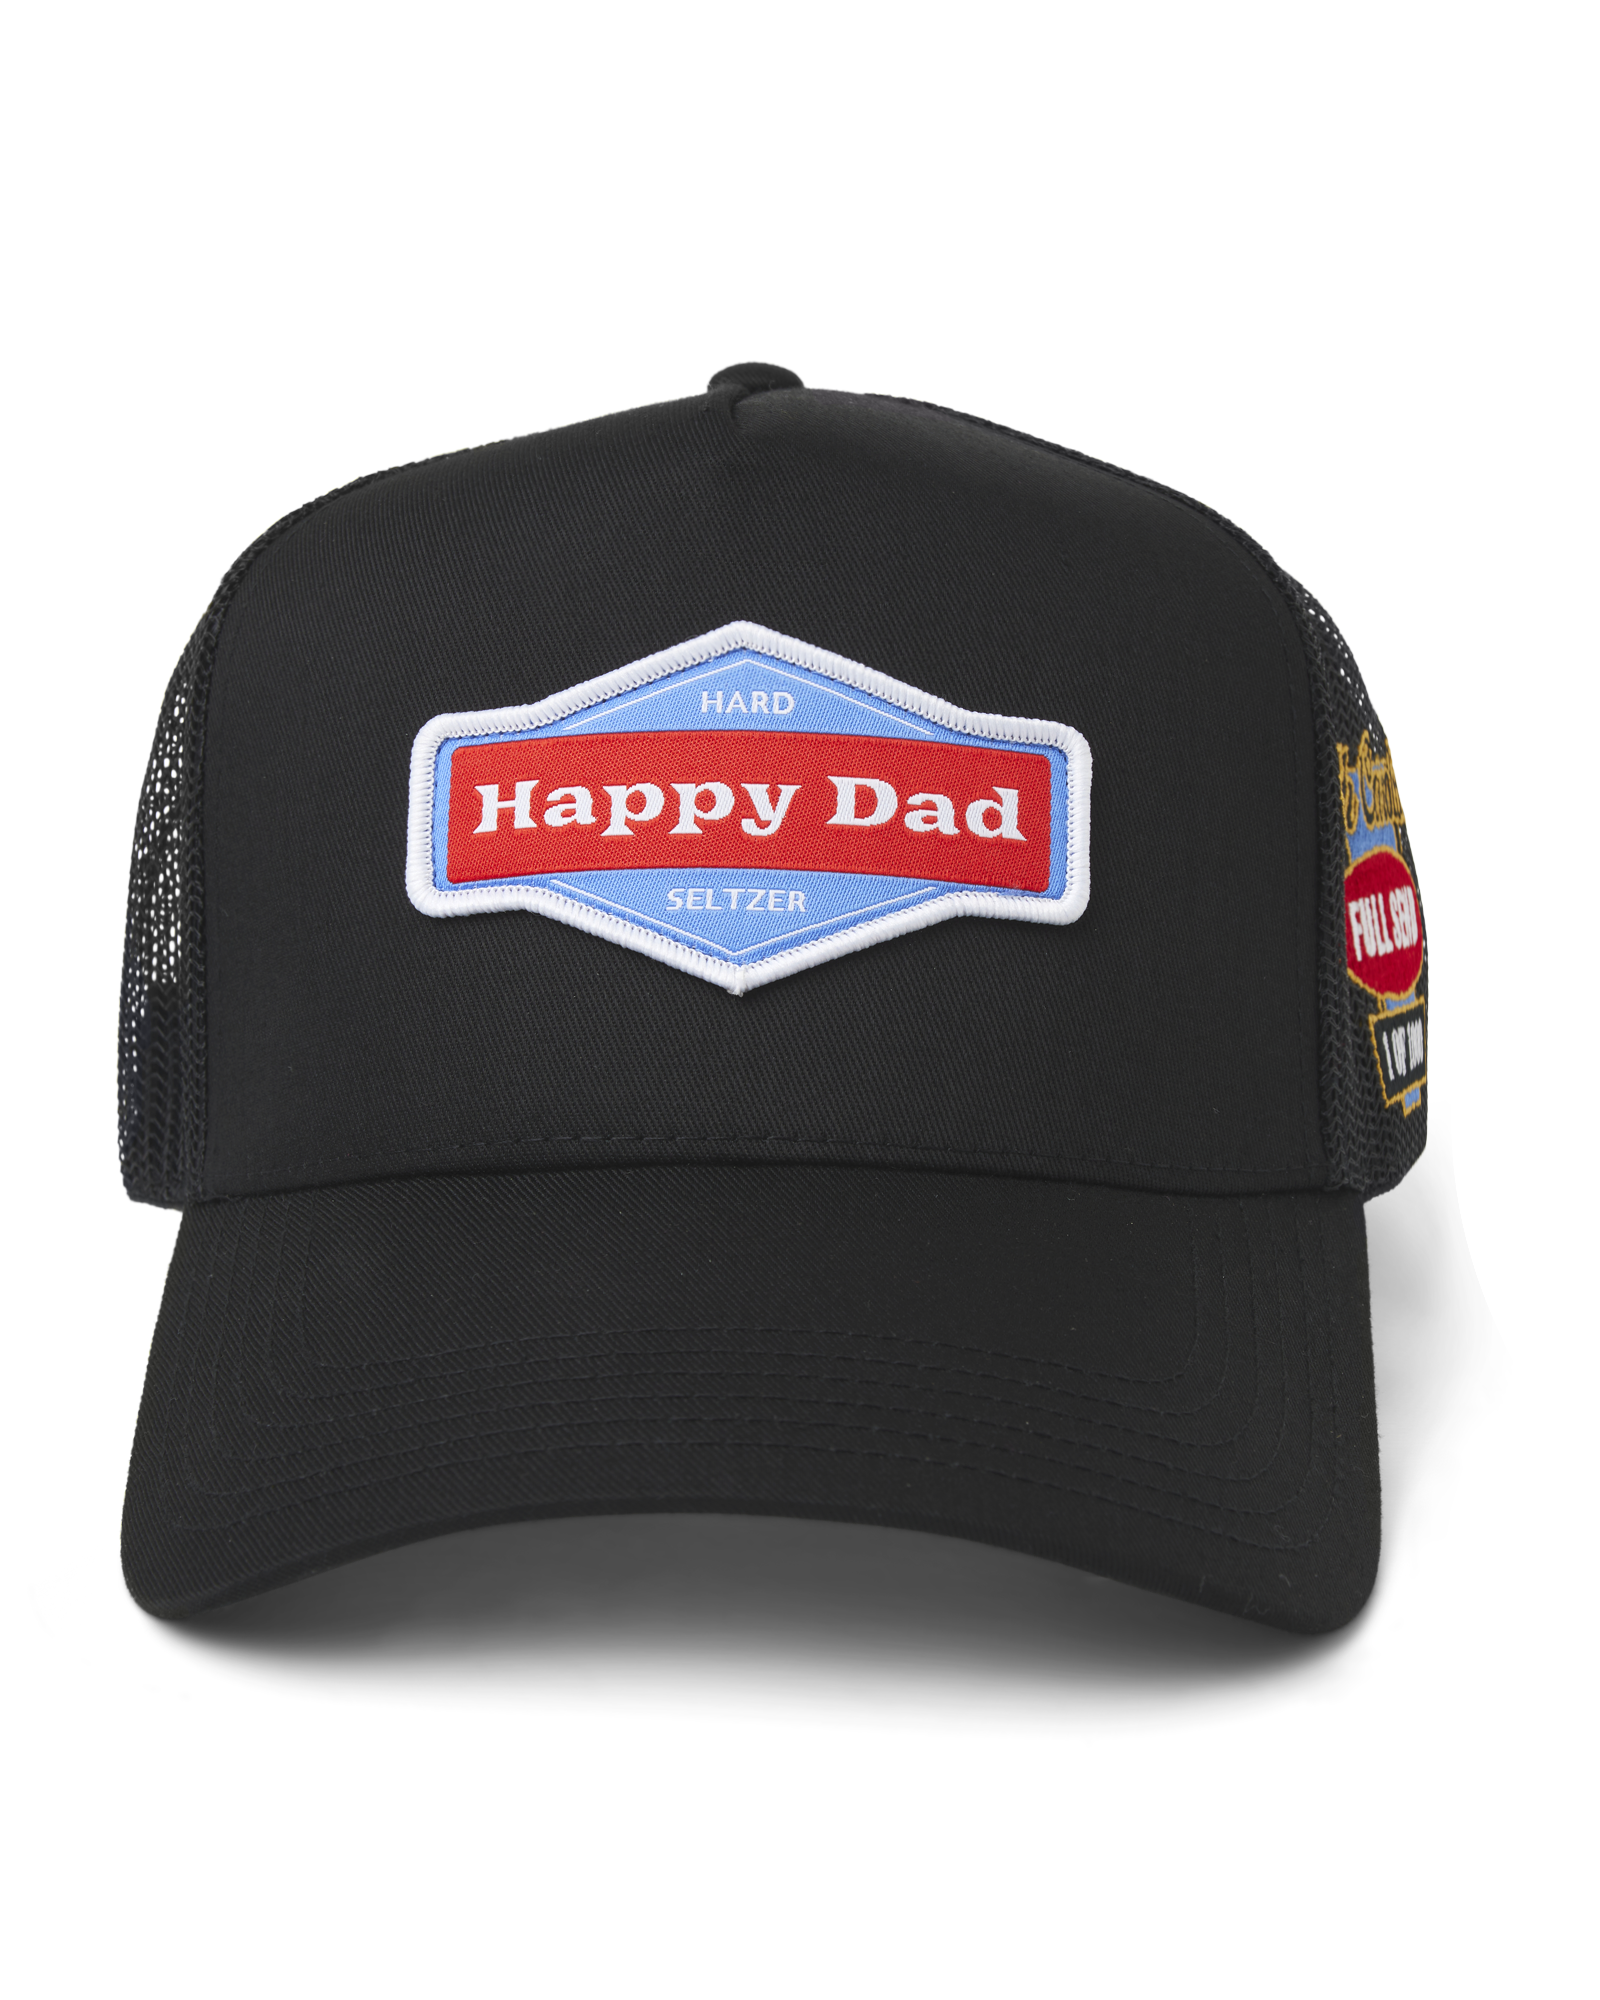 (Limited) Wisconsin - Happy Dad State Trucker Hat 1 of 1000